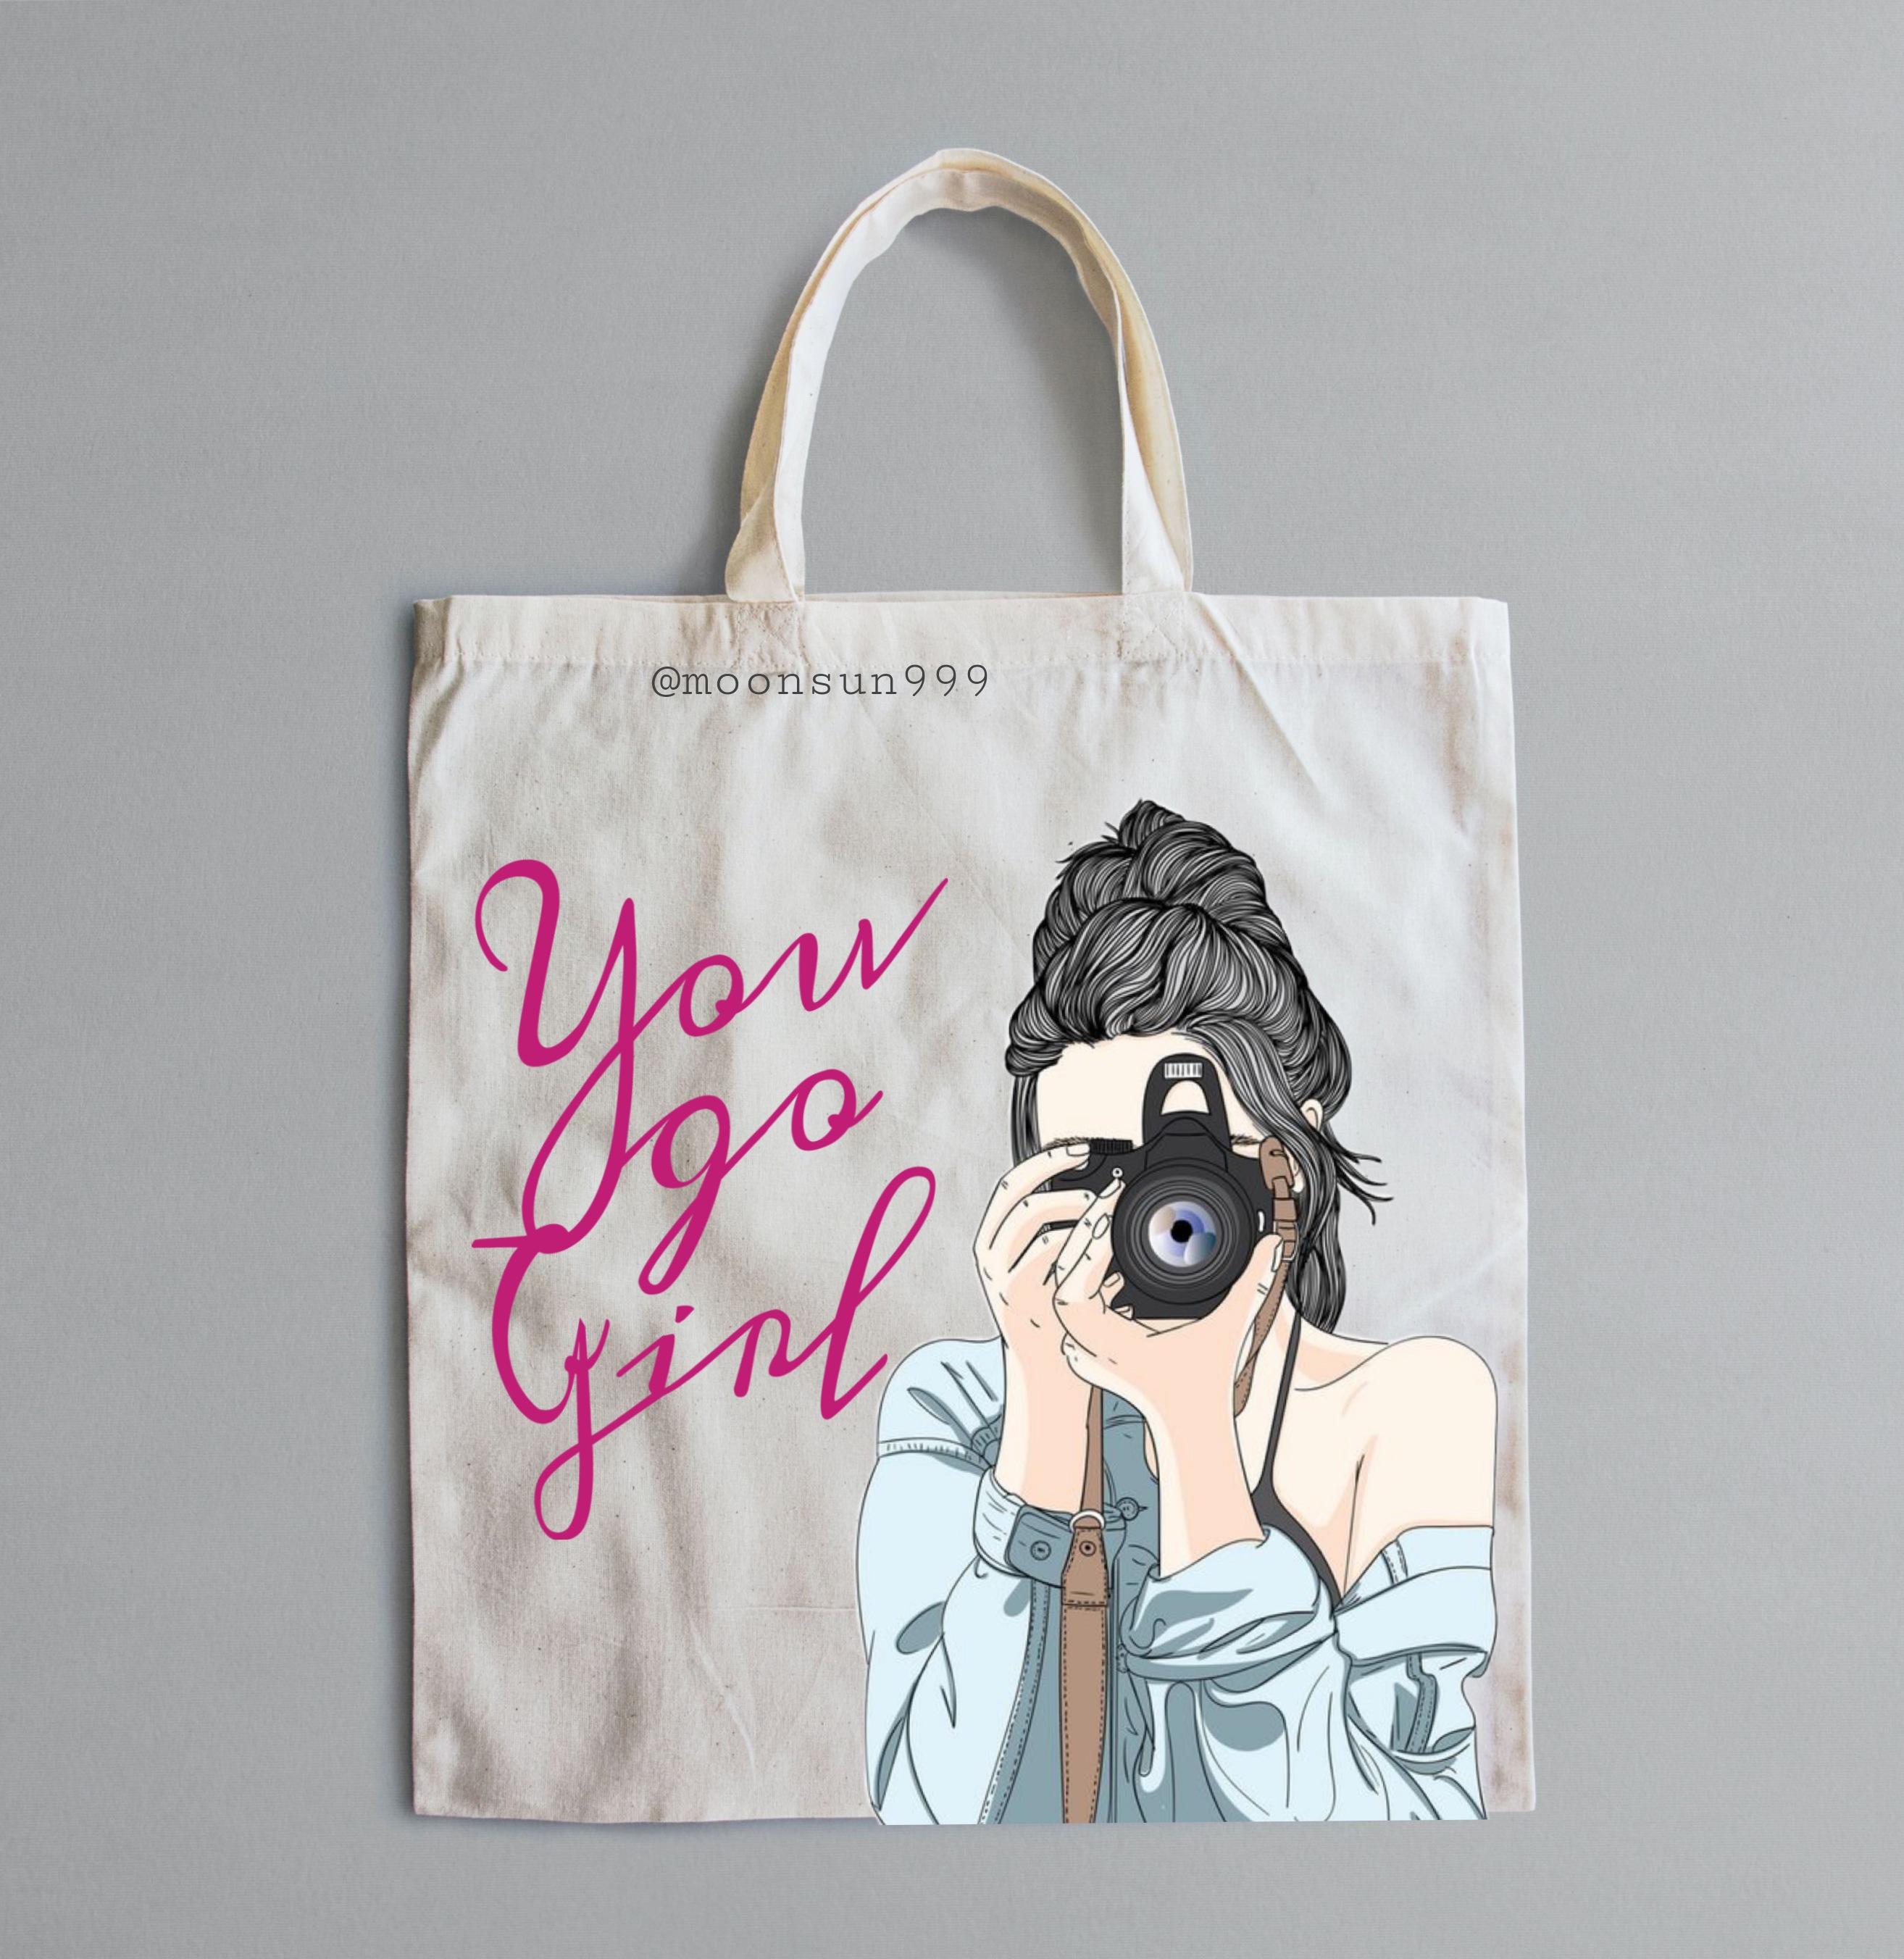 How to Design and Print a Tote Bag Pattern - Picsart Blog